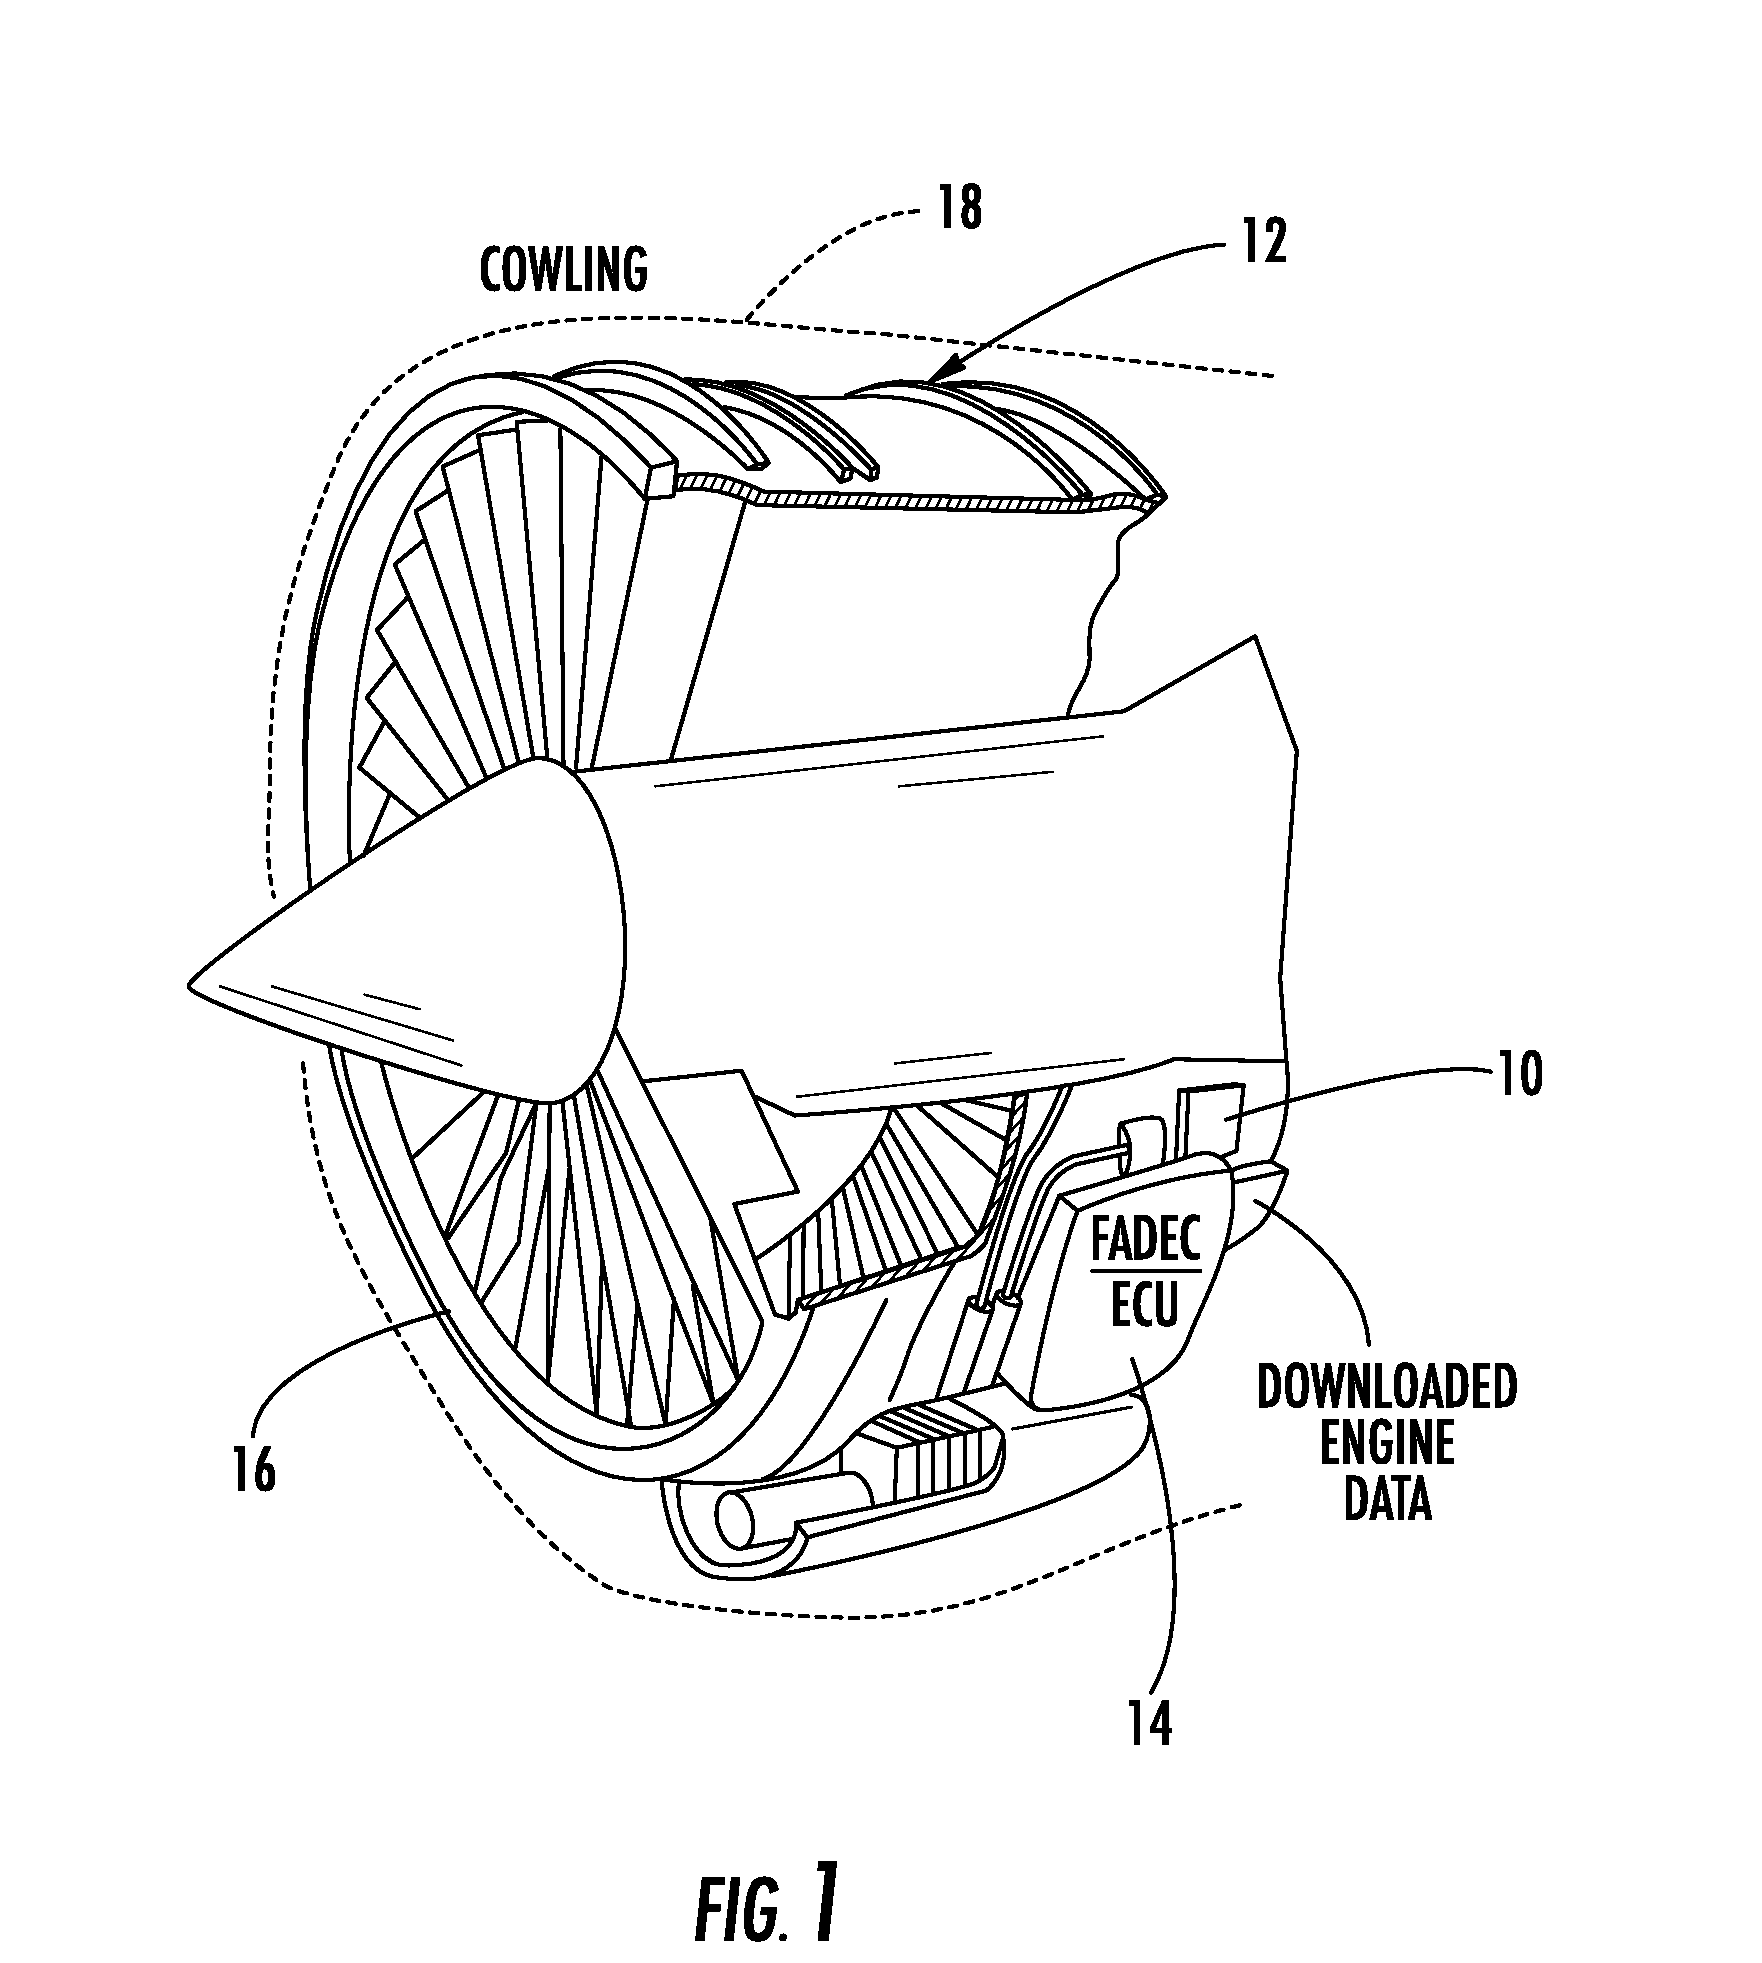 Wireless engine monitoring system with multiple hop aircraft communications capability and on-board processing of engine data